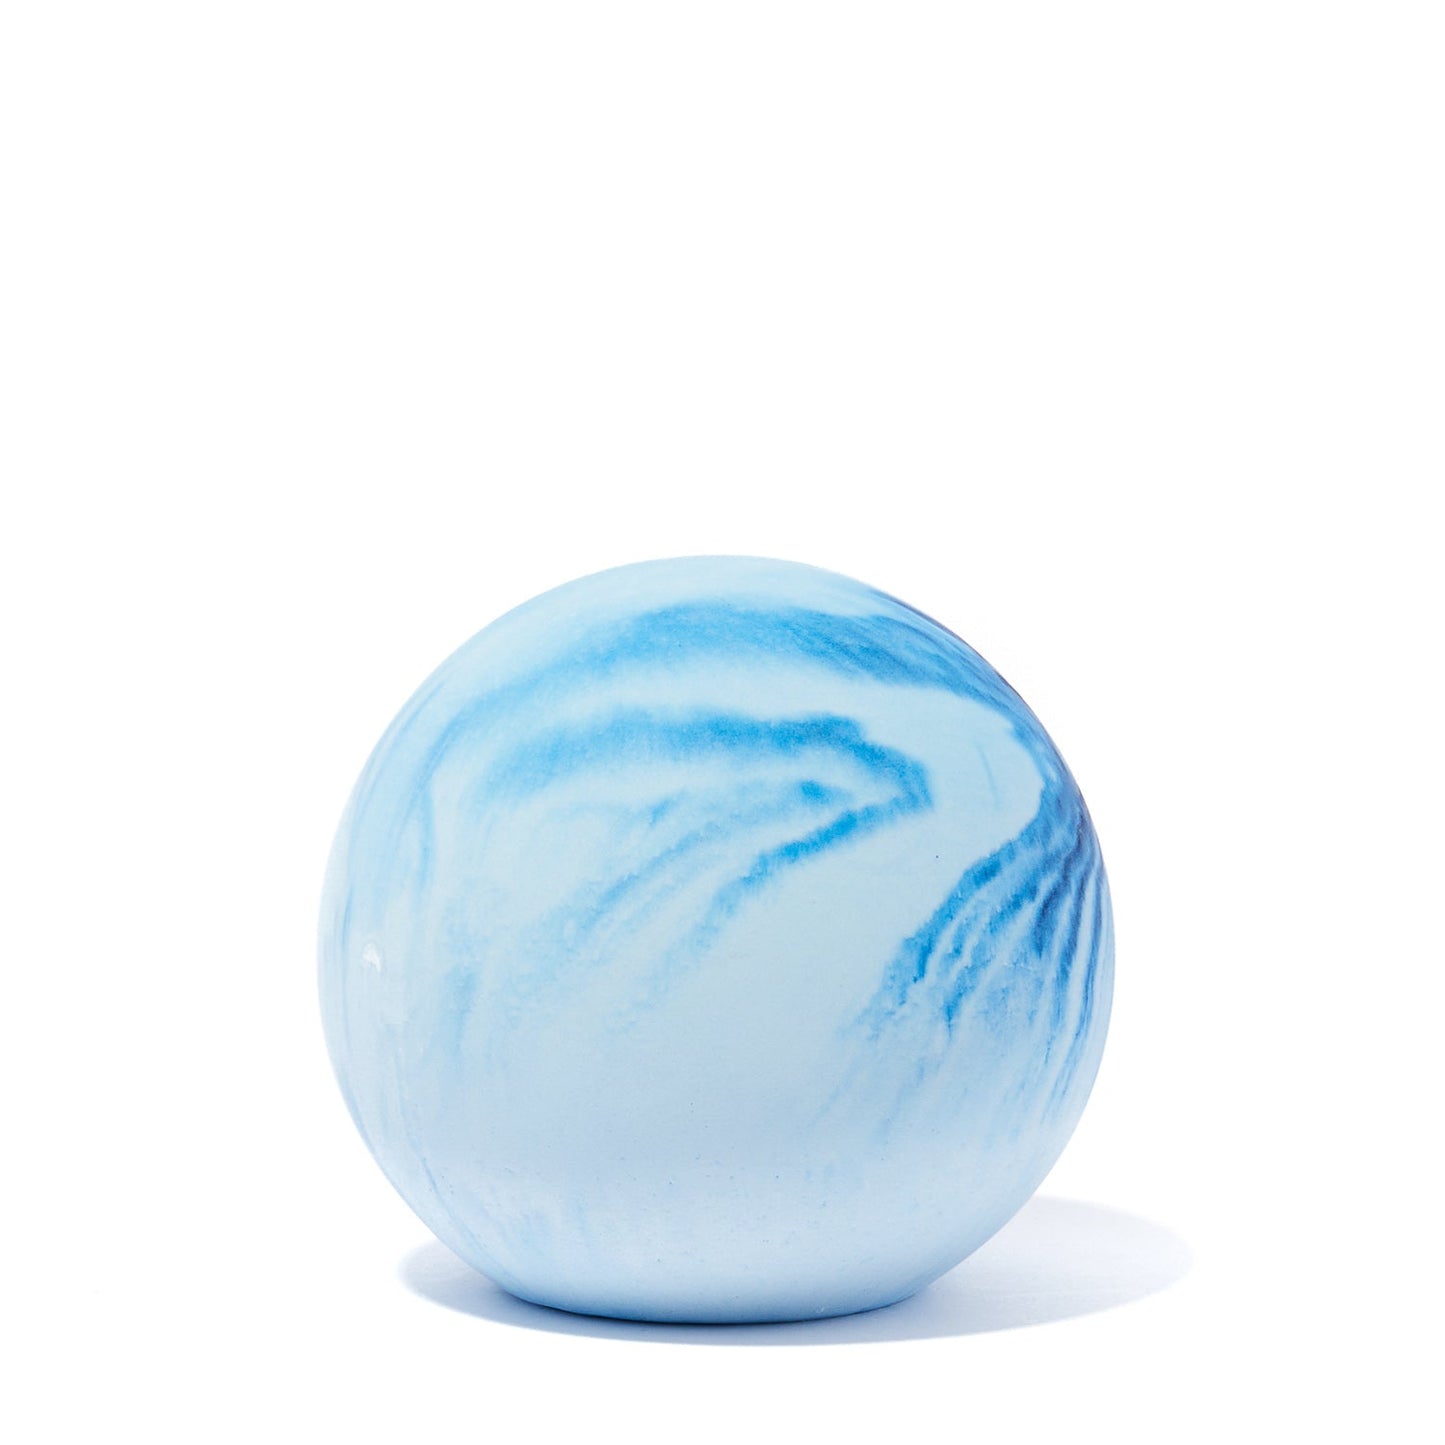 PLANET PAPERWEIGHT | SMALL BLUE